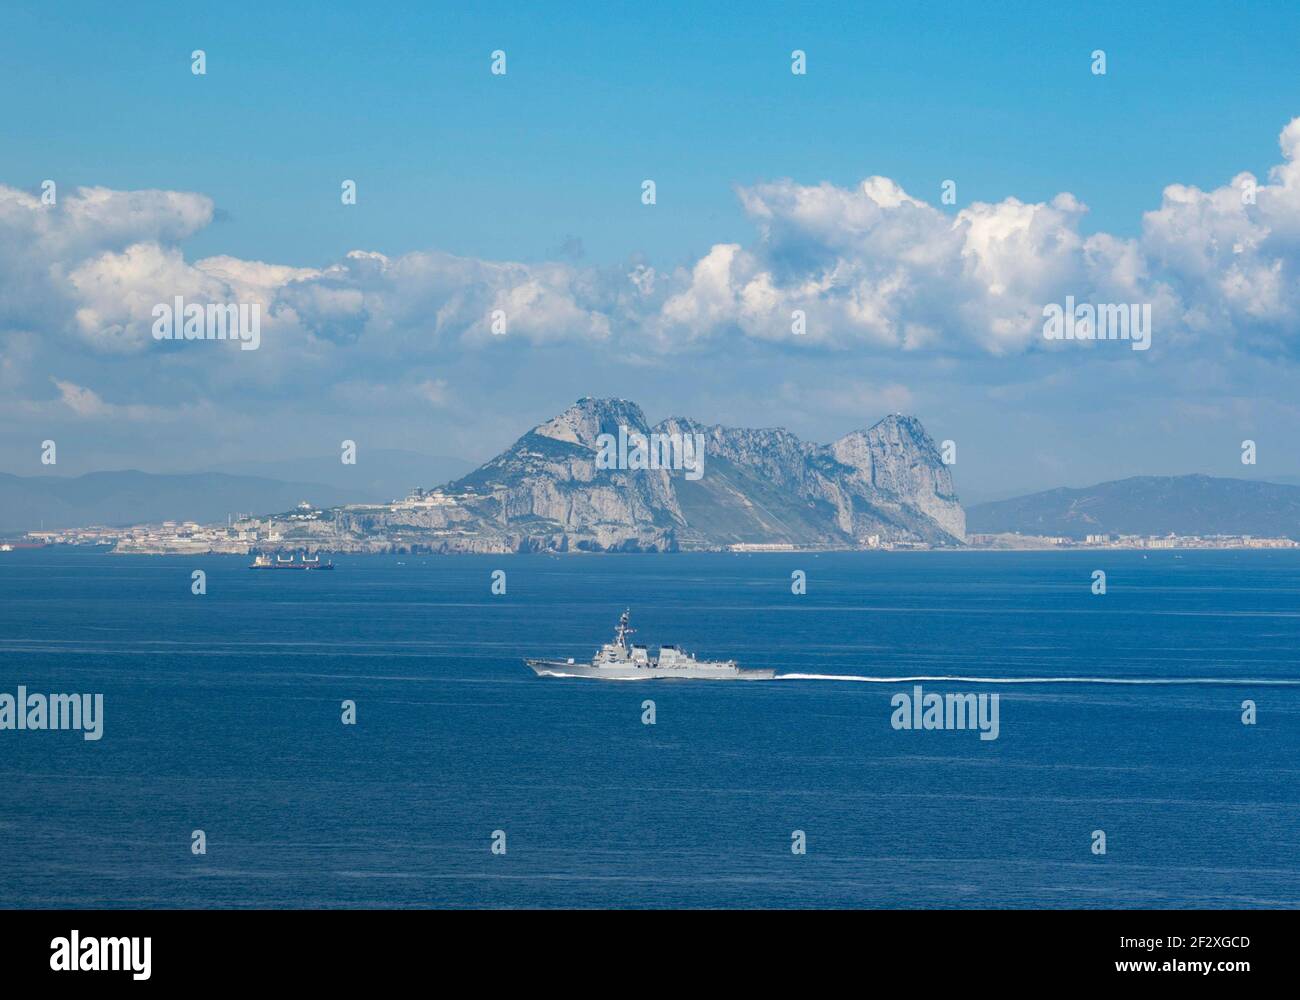 The U.S. Navy Arleigh-Burke class guided-missile destroyer USS Winston S. Churchill transits the Strait of Gibraltar with the Eisenhower Carrier Strike Group on a routine deployment March 10, 2021 in the Mediterranean Sea. Stock Photo